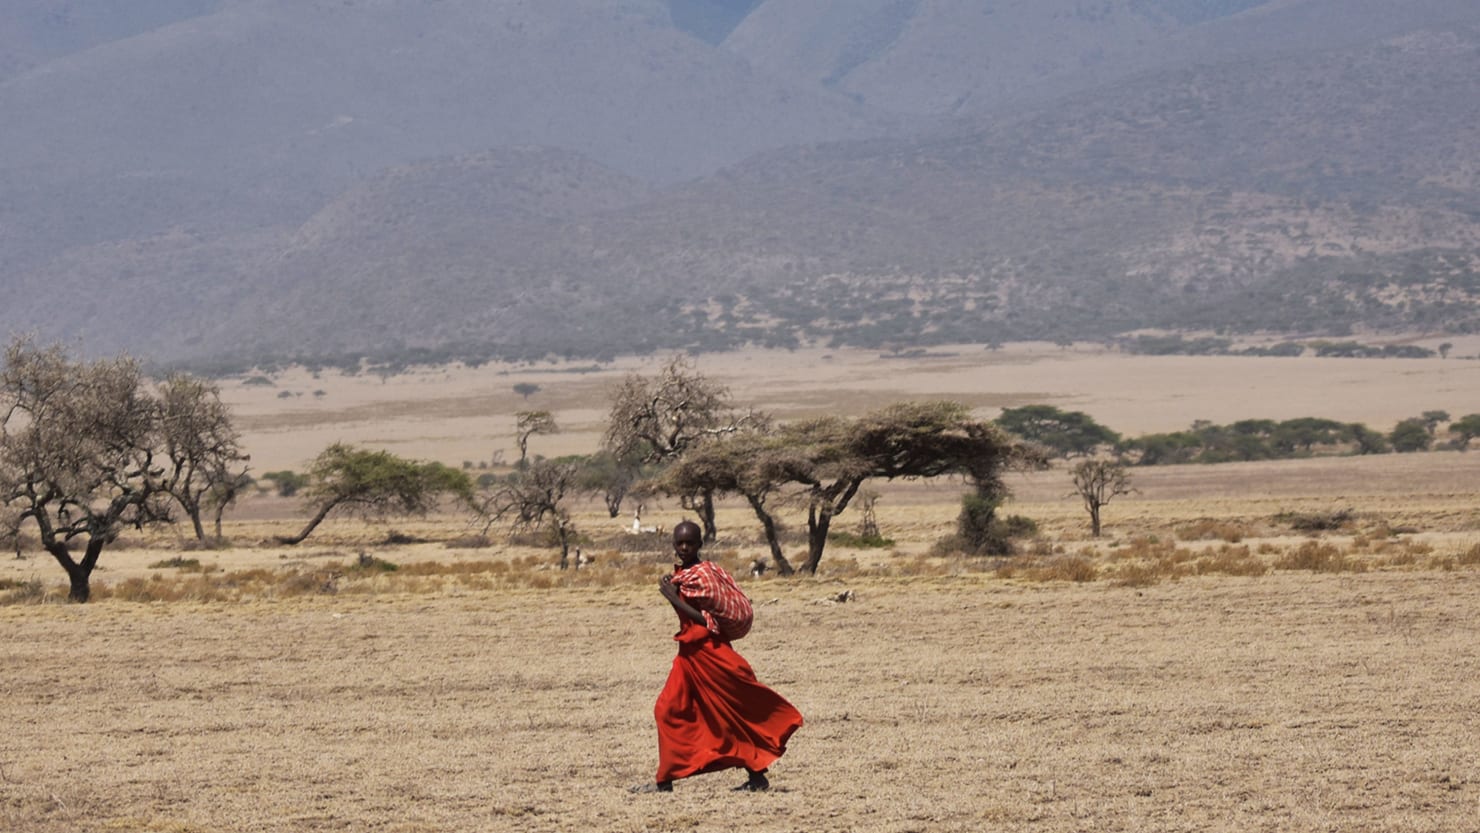 Maasai couple (warrior and girl) in traditional clothing. Africa